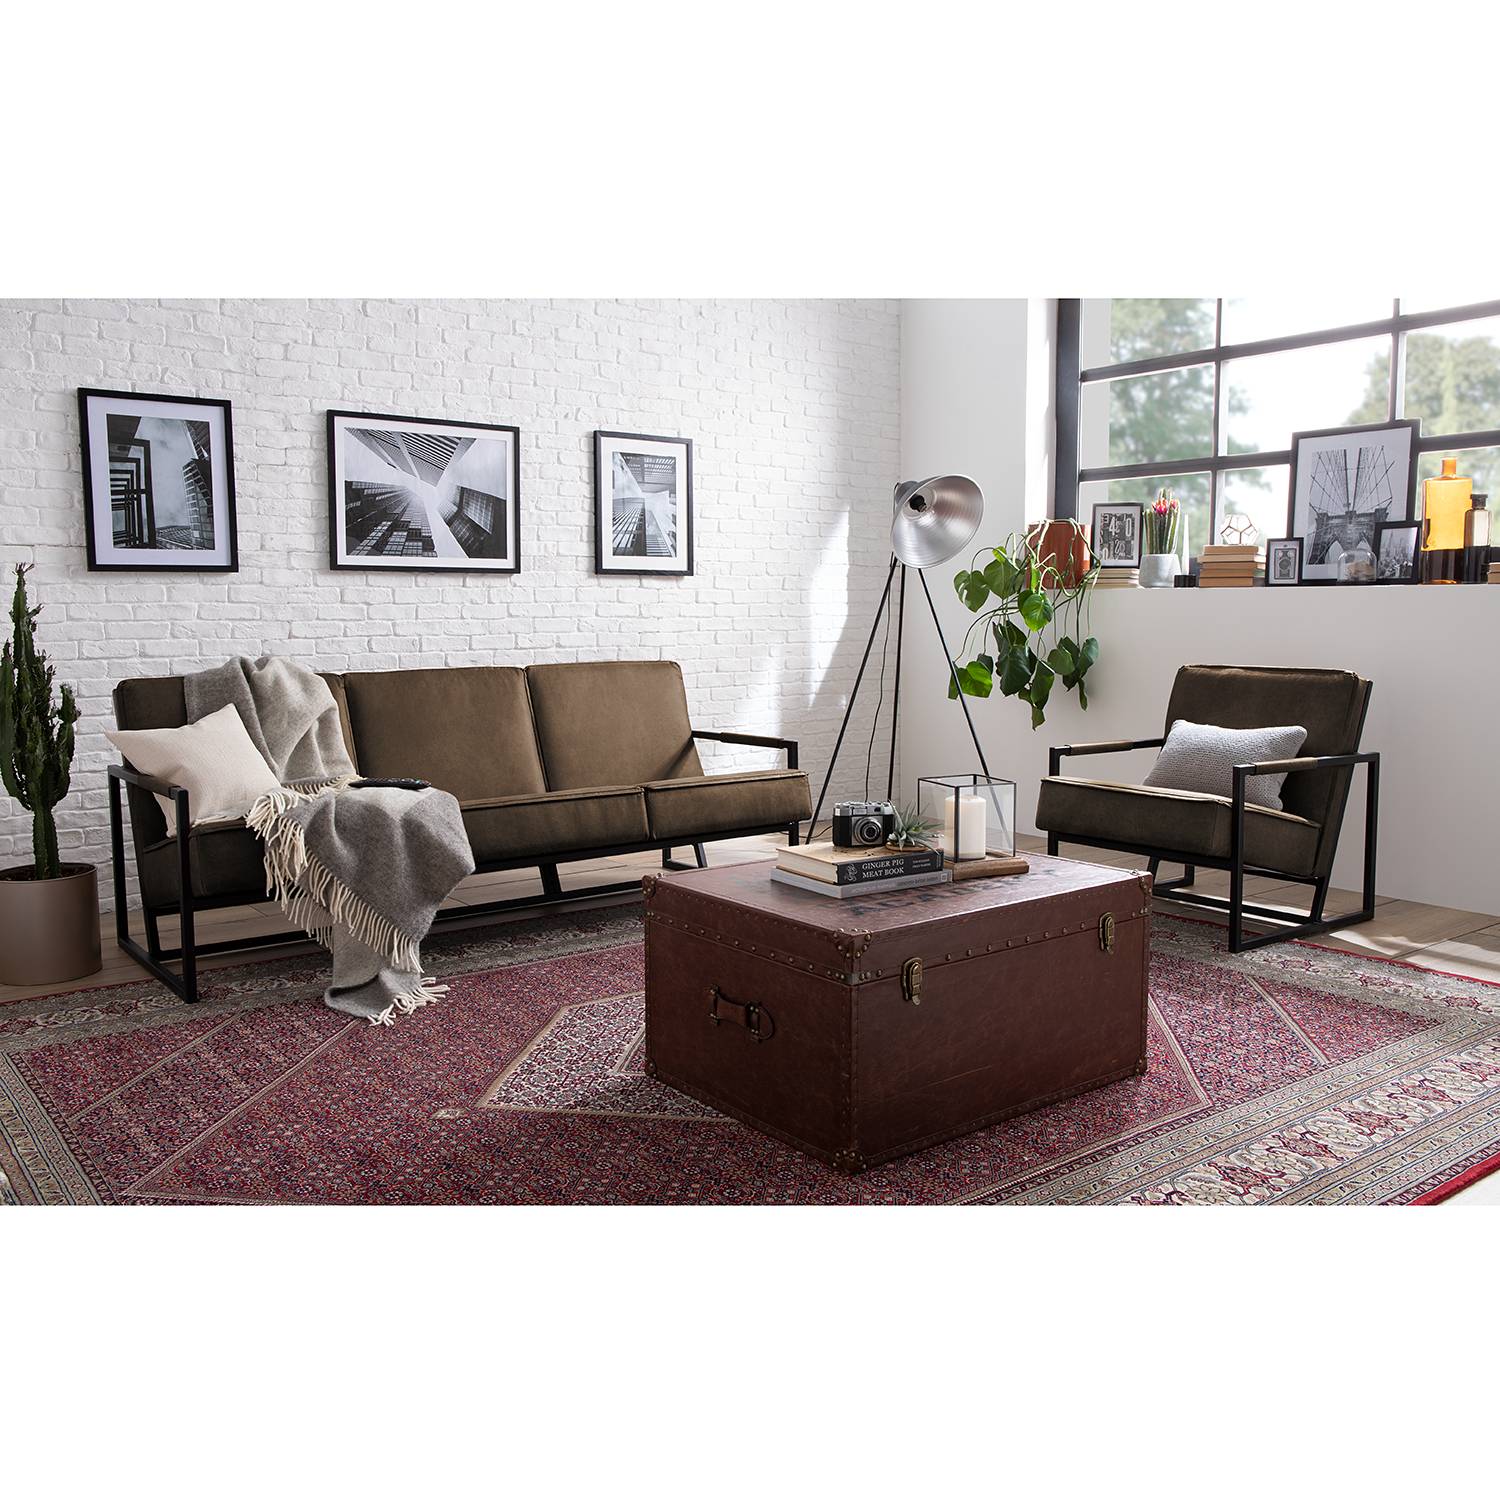 Home24 Fauteuil Rhode, ars manufacti